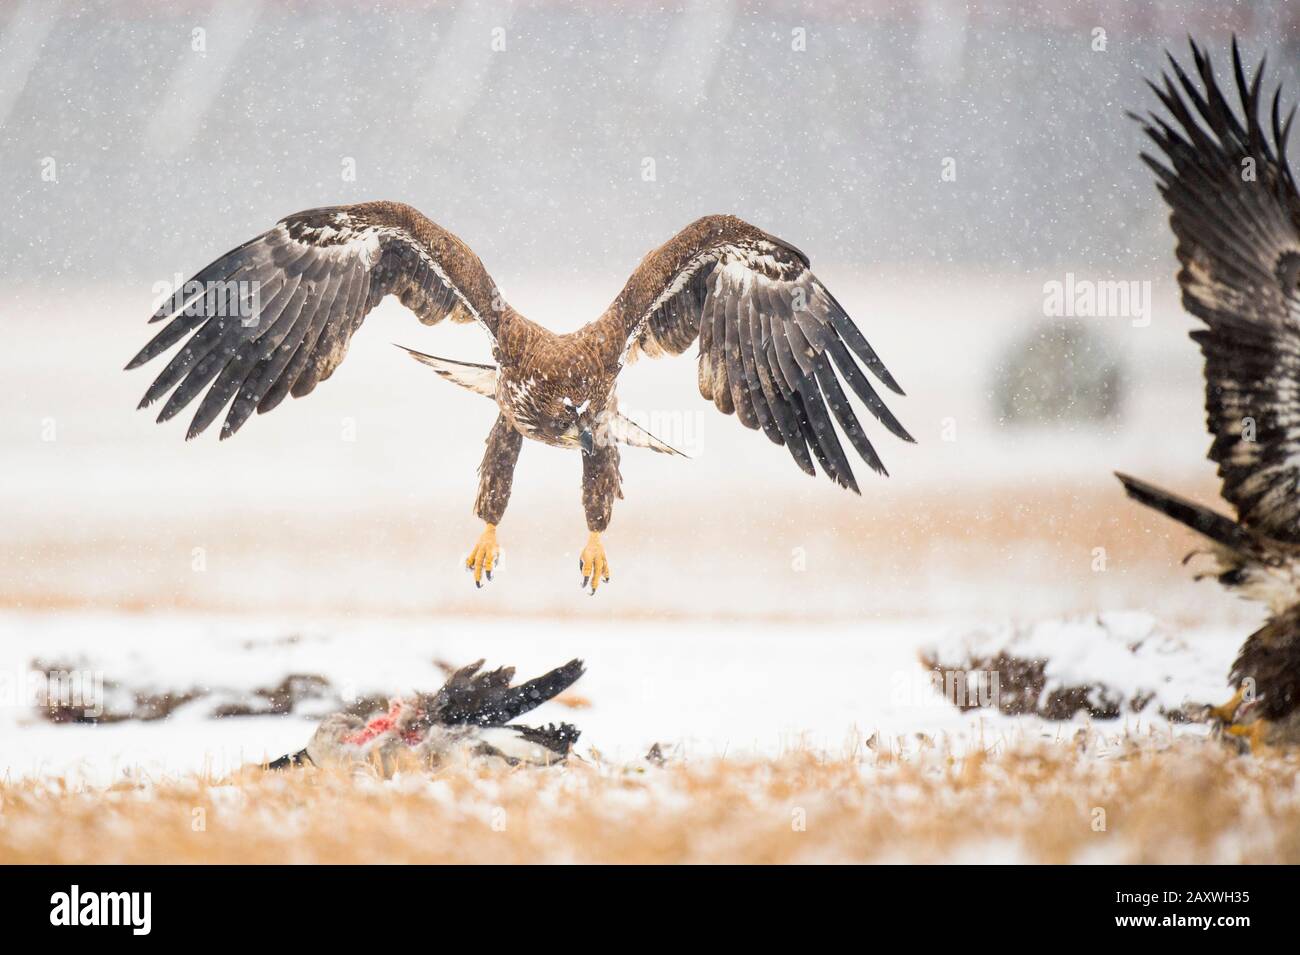 A juvenile Bald Eagle flies in a light snowfall on a cold winter day in an open field with carcasses on the ground. Stock Photo